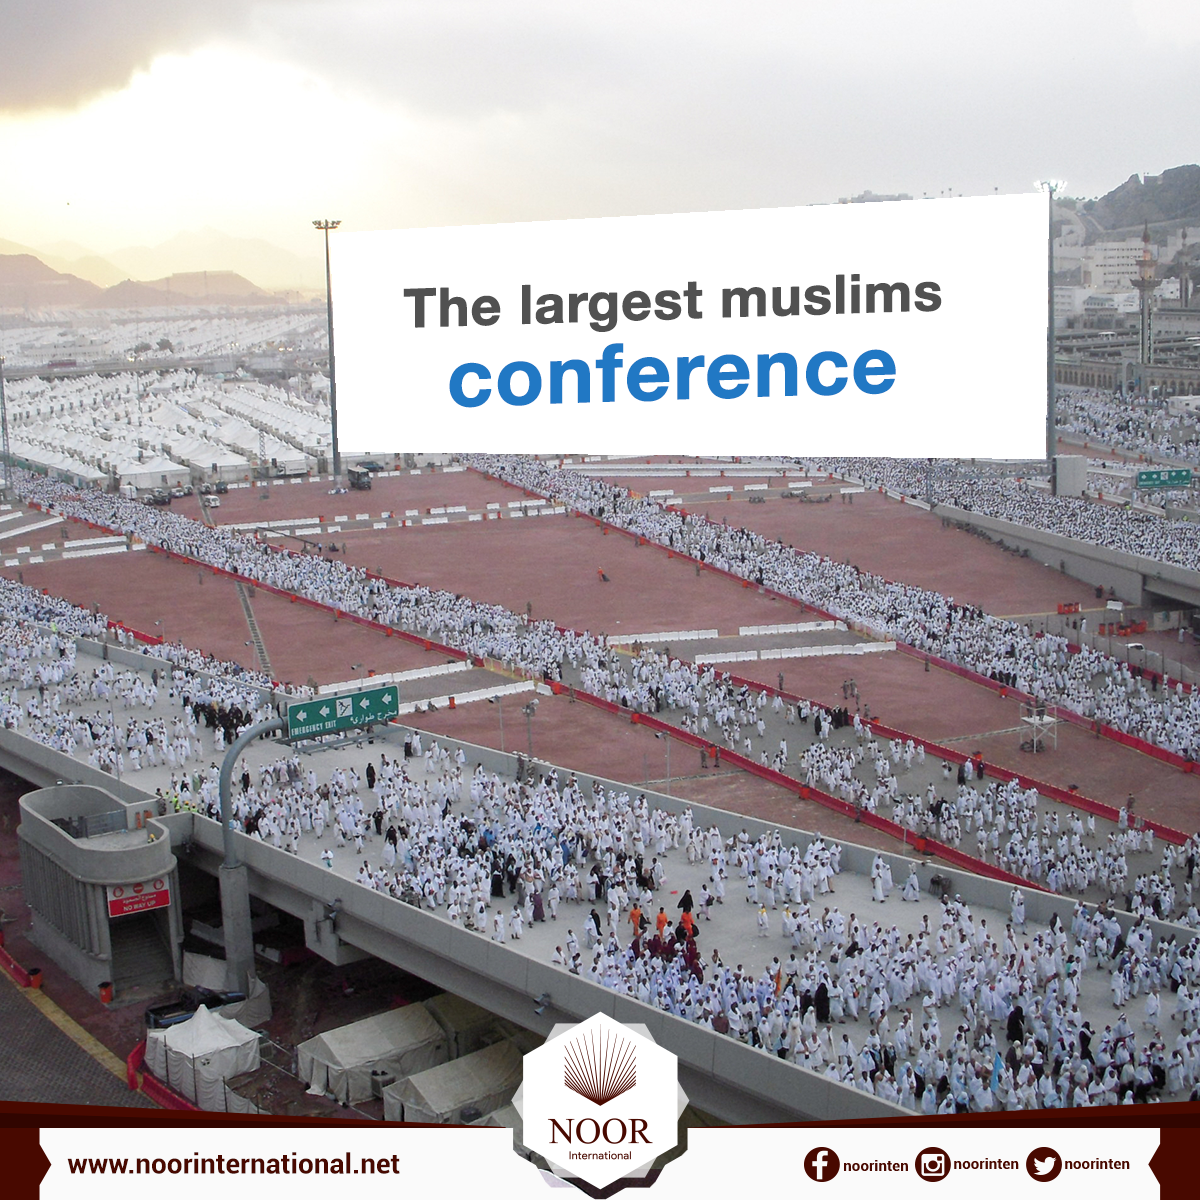 The largest Islamic conference